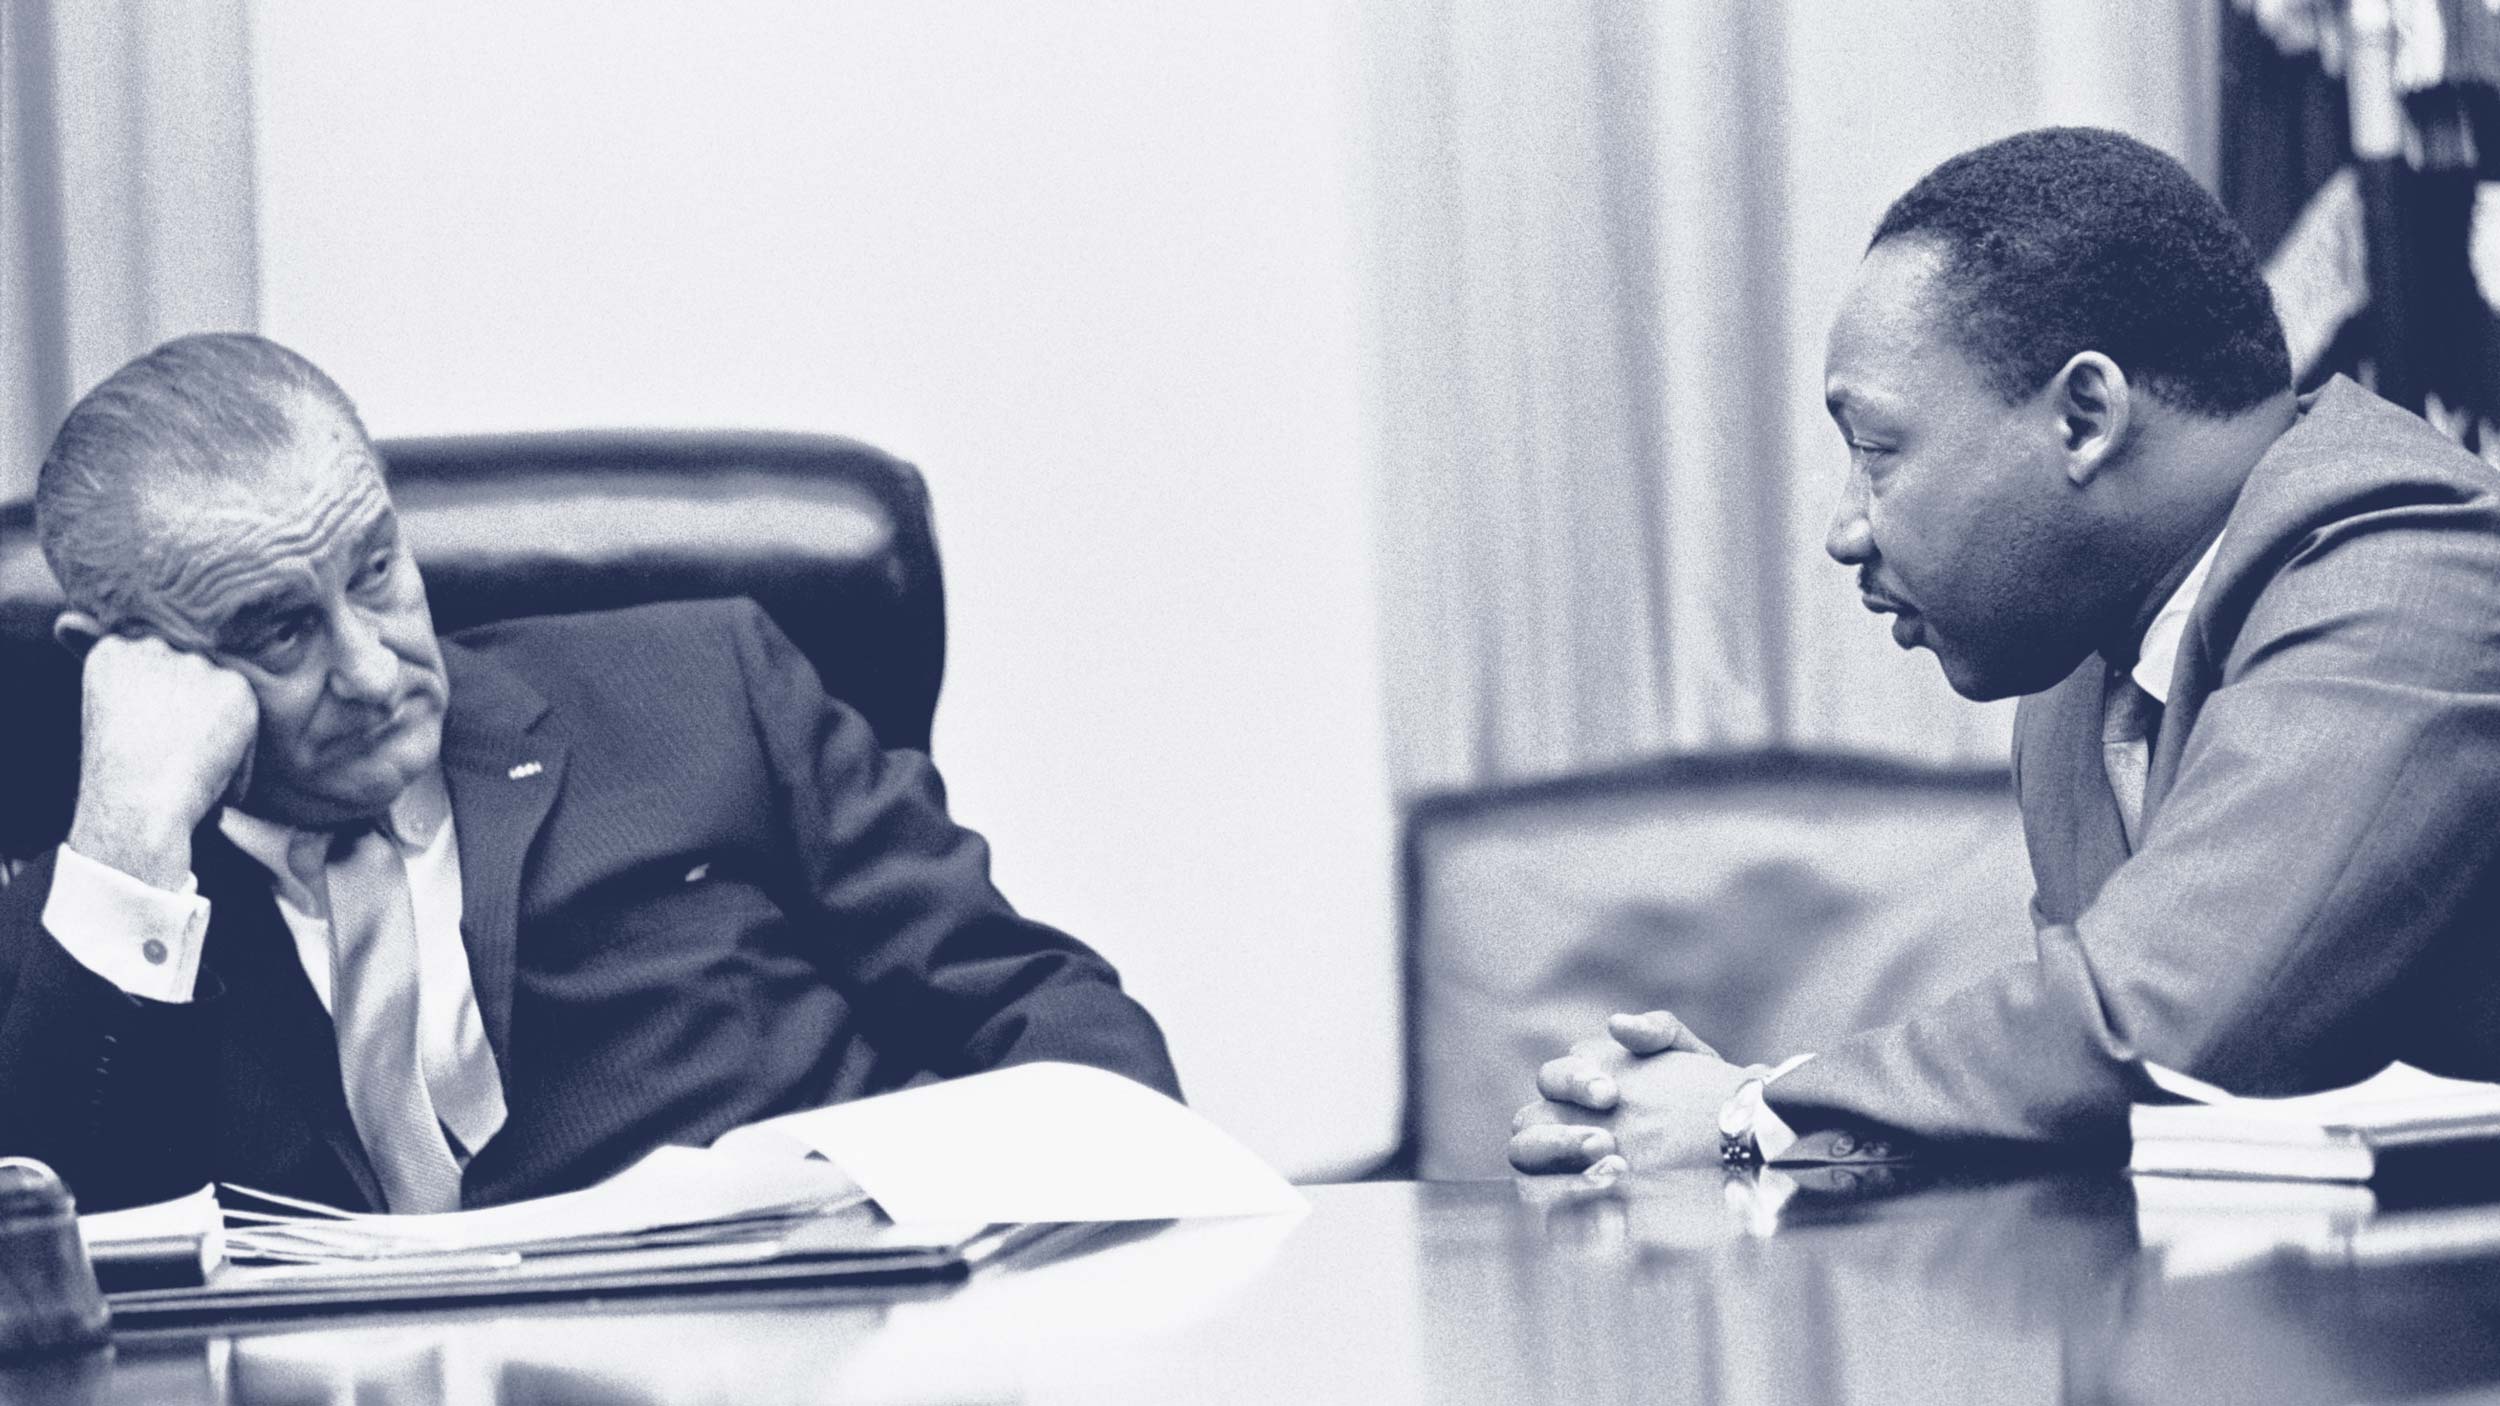 Martin Luther King Jr. Talking to another man, black and white image